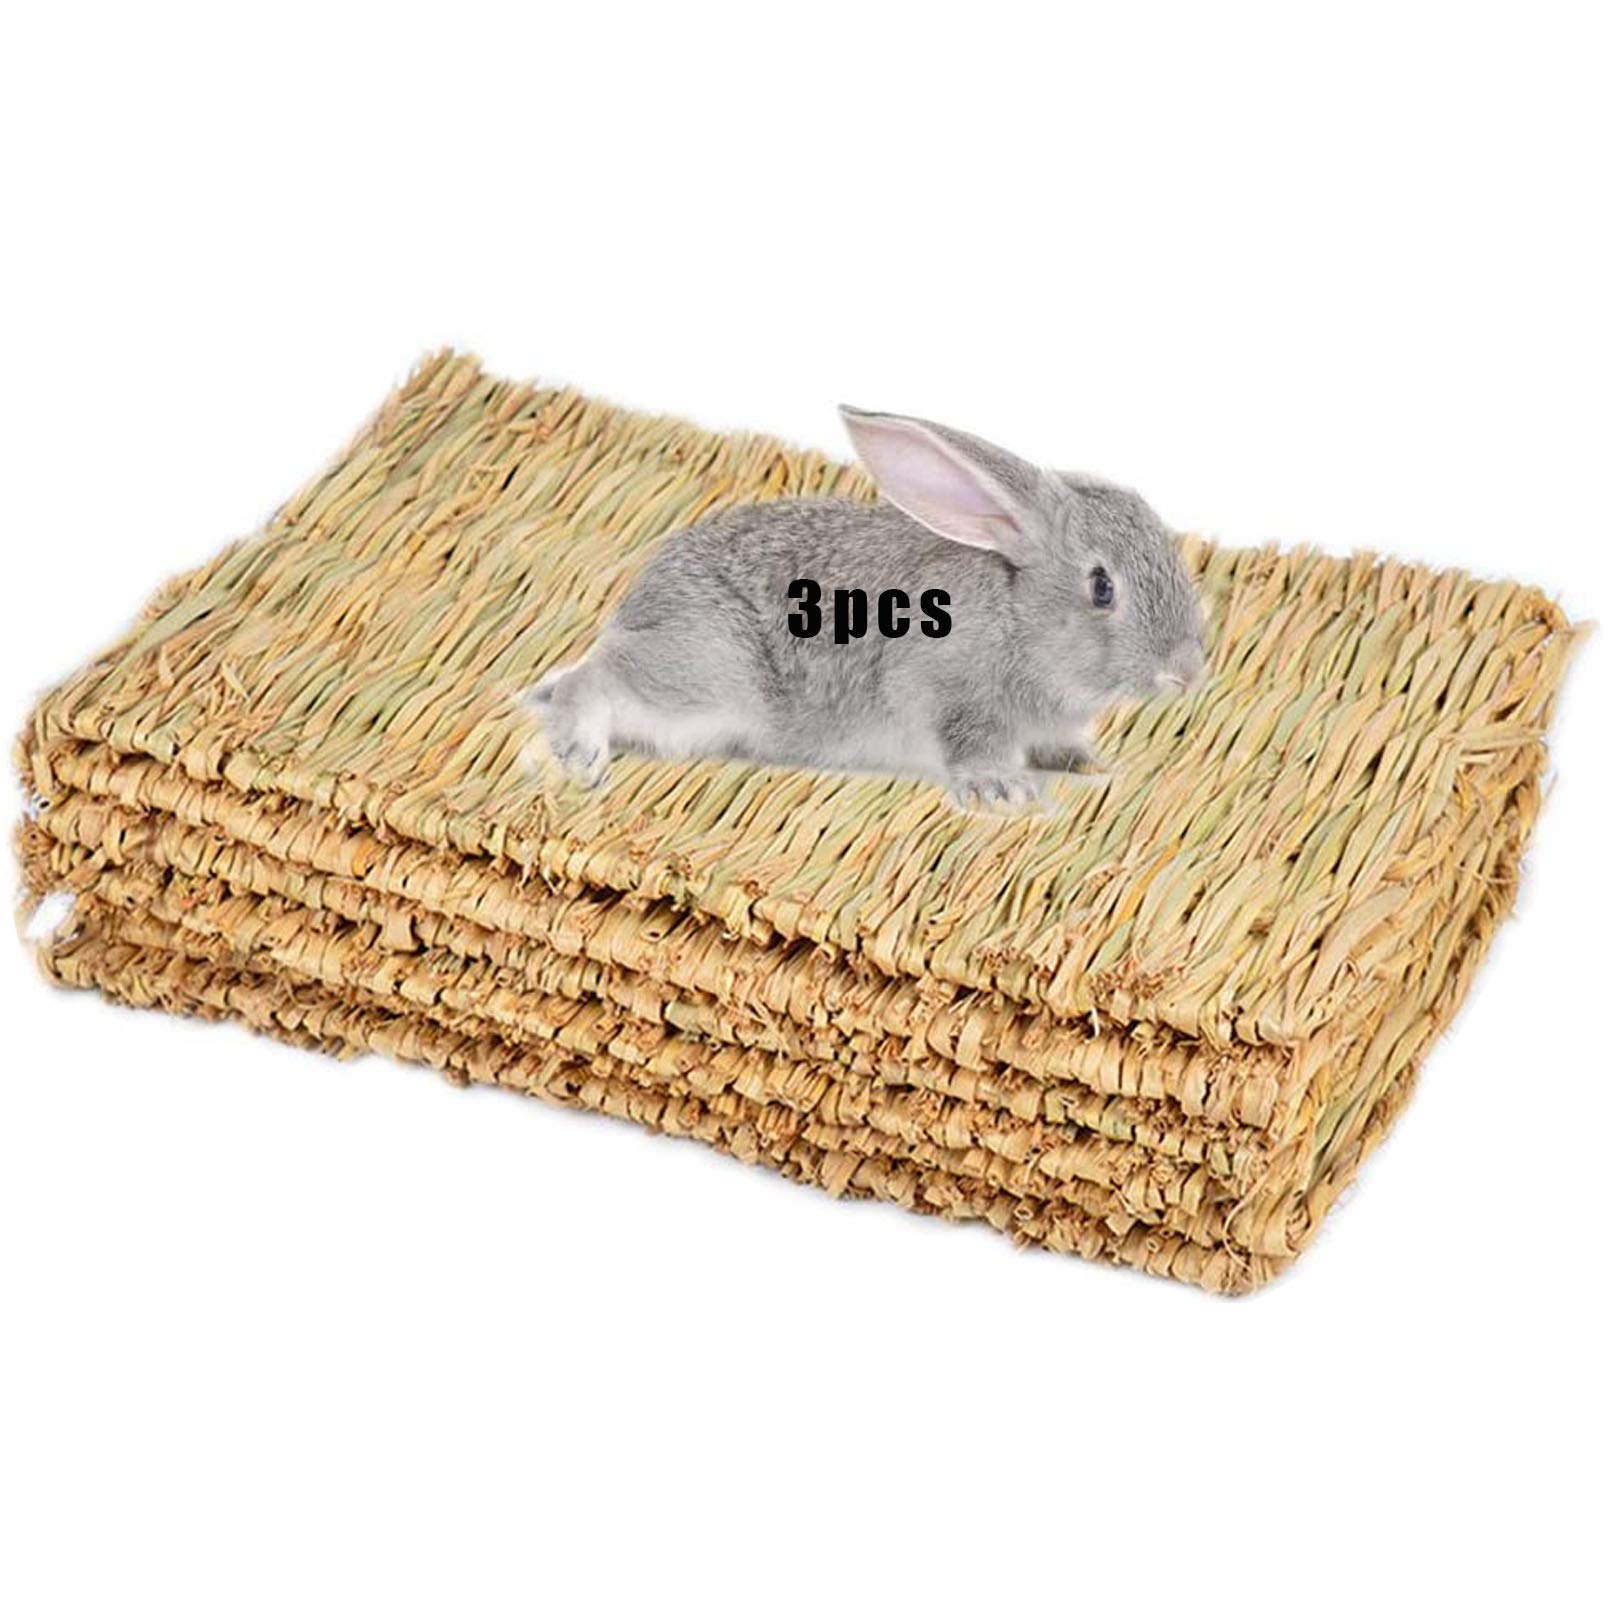 Book Cover Grass Mat Woven Bed Mat for Small Animal Bunny Bedding Nest Chew Toy Bed Play Toy for Guinea Pig Parrot Rabbit Hamster Rat(Pack of 3) Basic